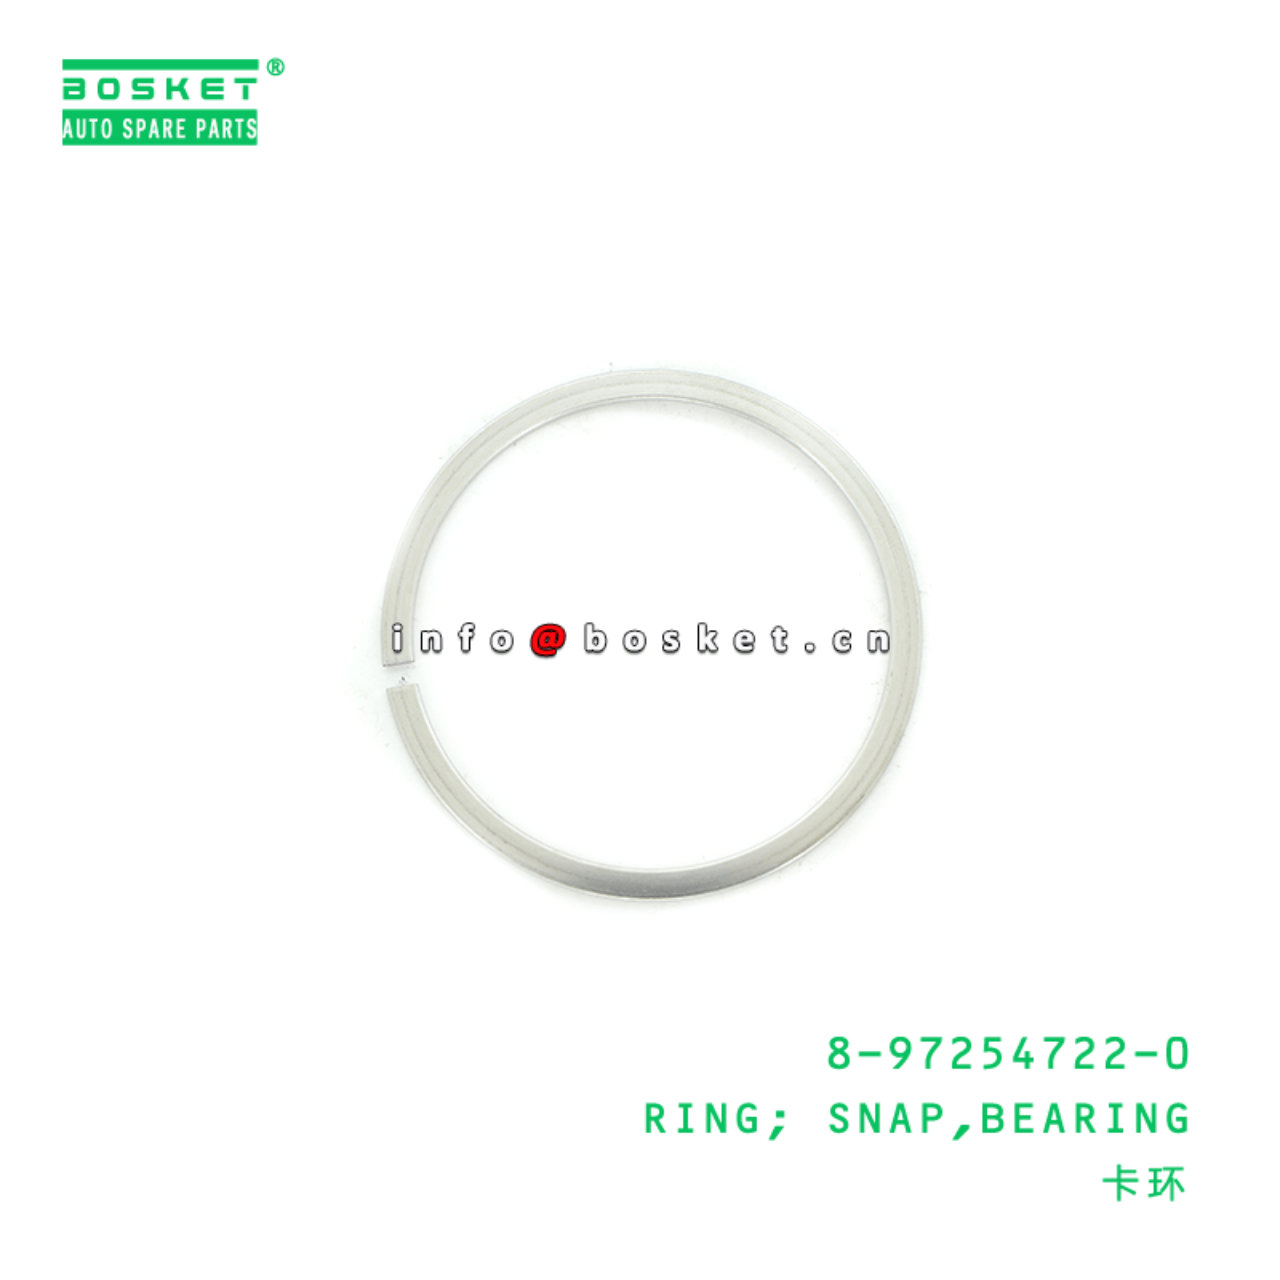  8-97254722-0 Bearing Snap Ring 8972547220 Suitable for ISUZU NKR